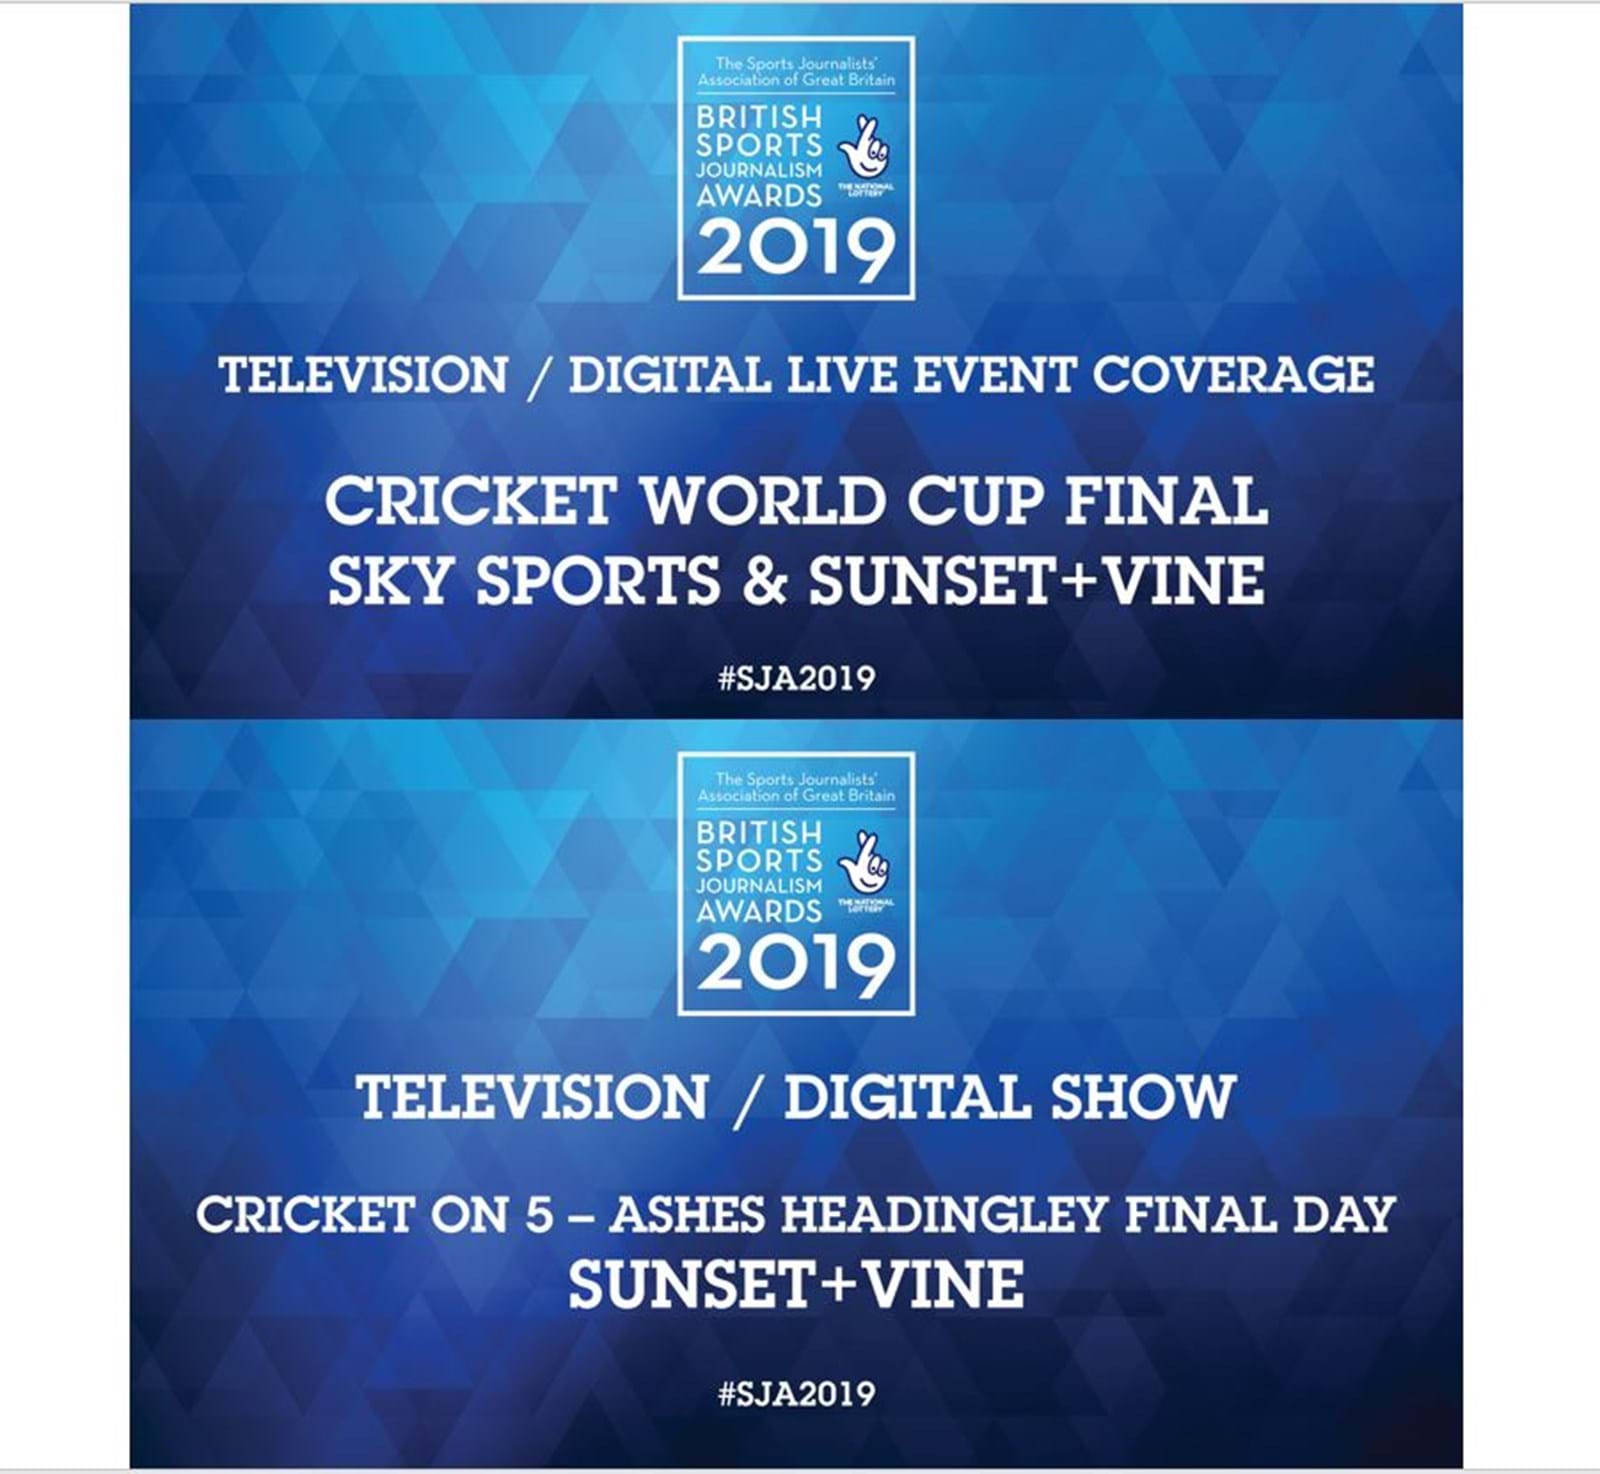 Sunset+Vine pick up two wins at Sports Journalism Awards 2020